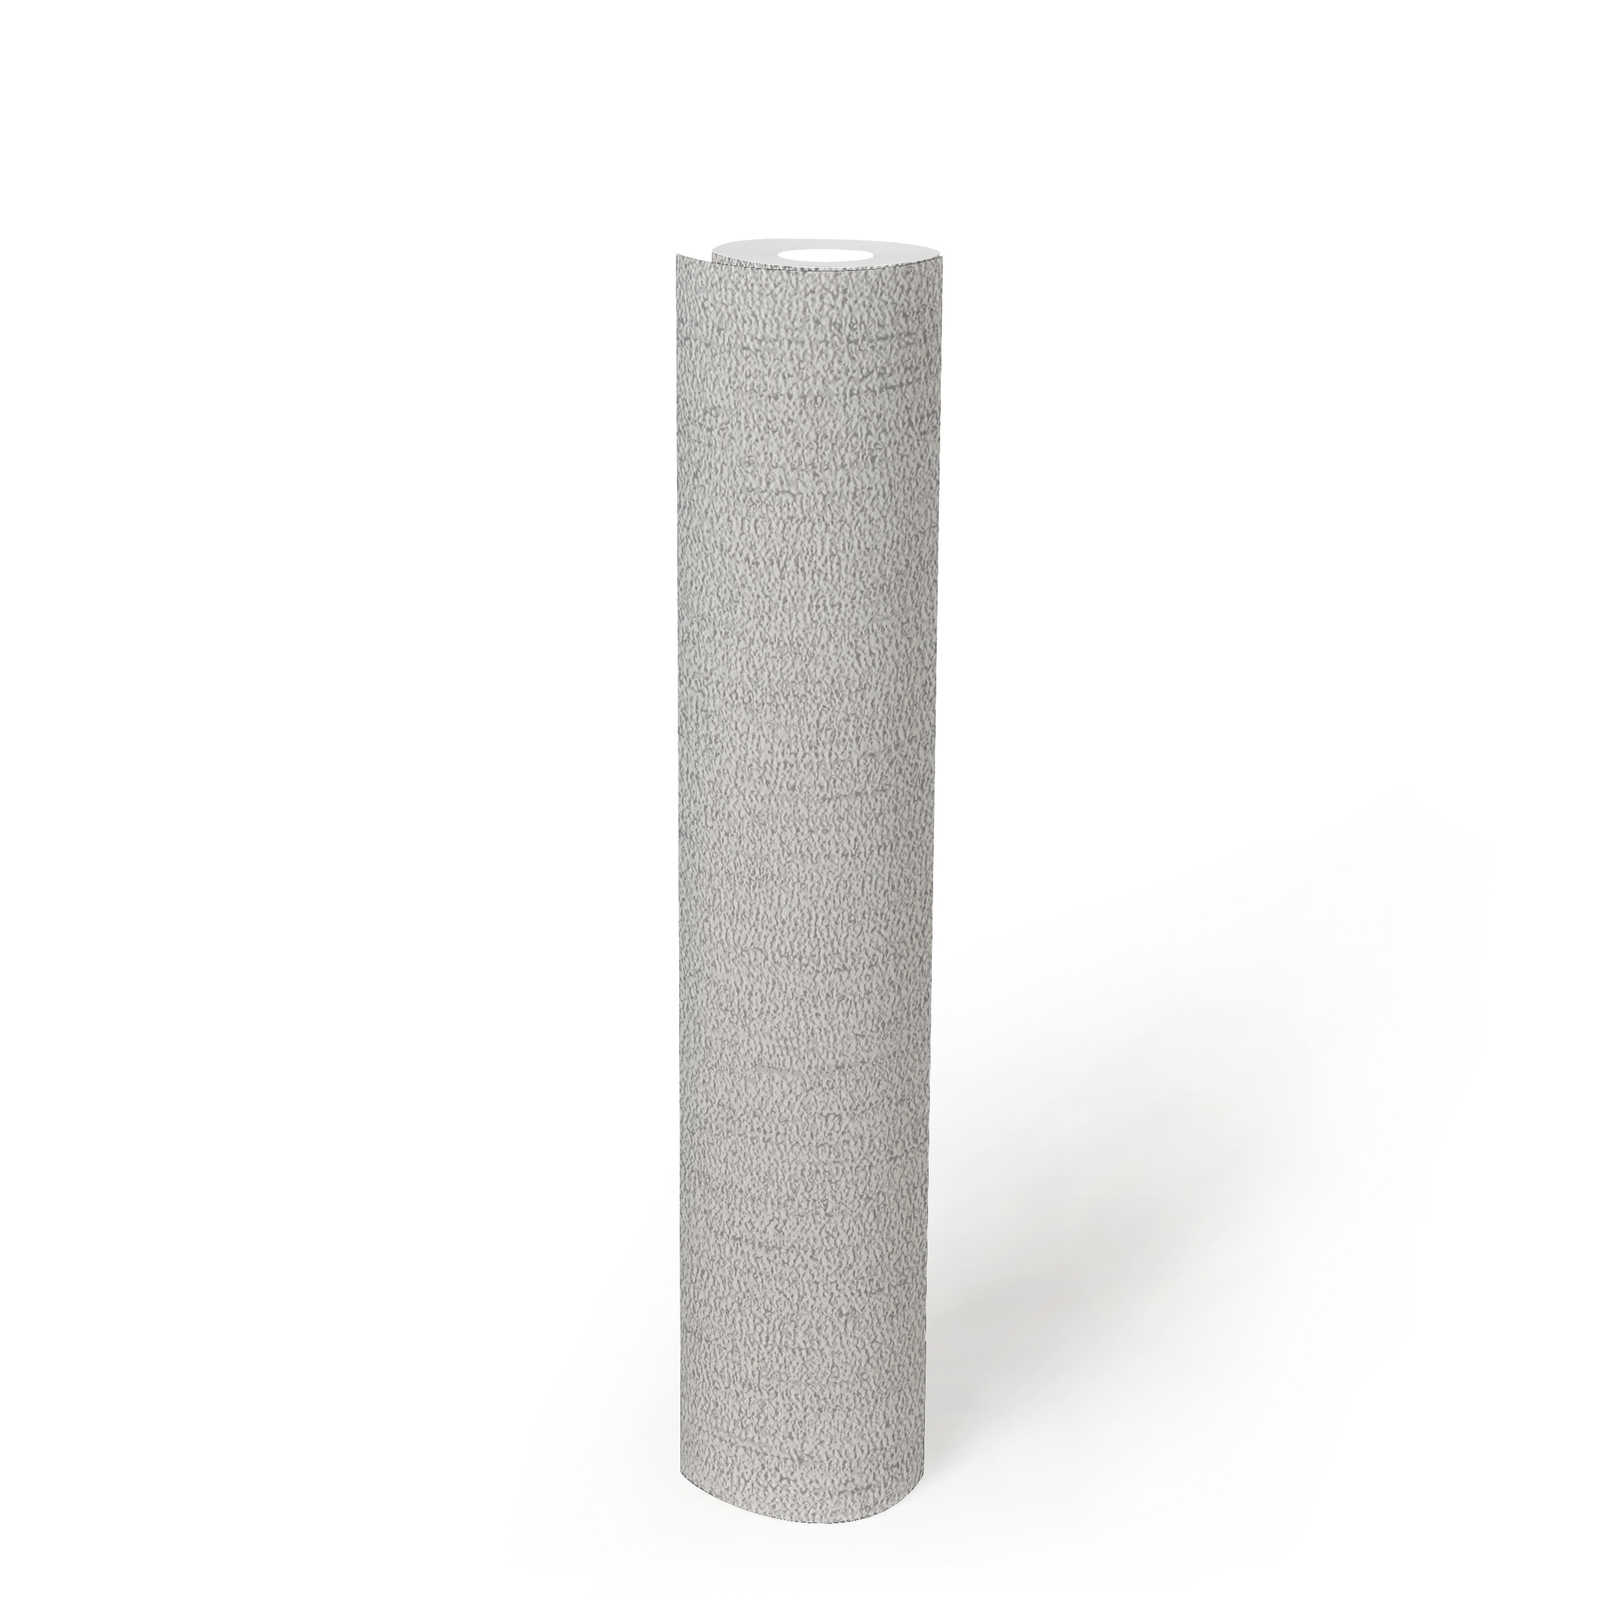             Textured wallpaper with fabric pattern - light grey, silver
        